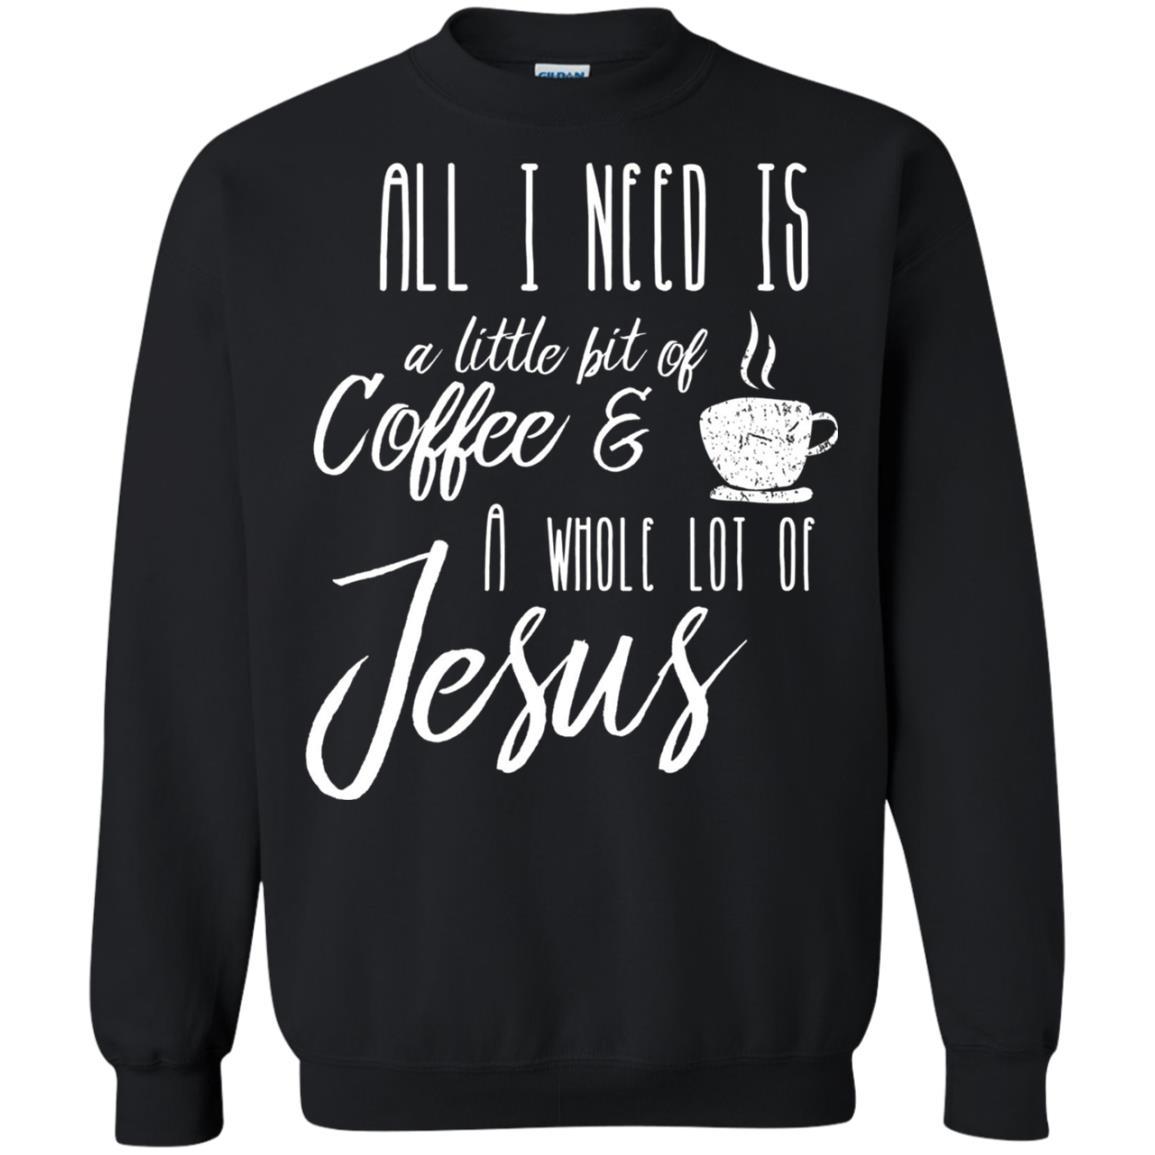 Christian T-shirt All I Need Is A Little Bit Of Coffee